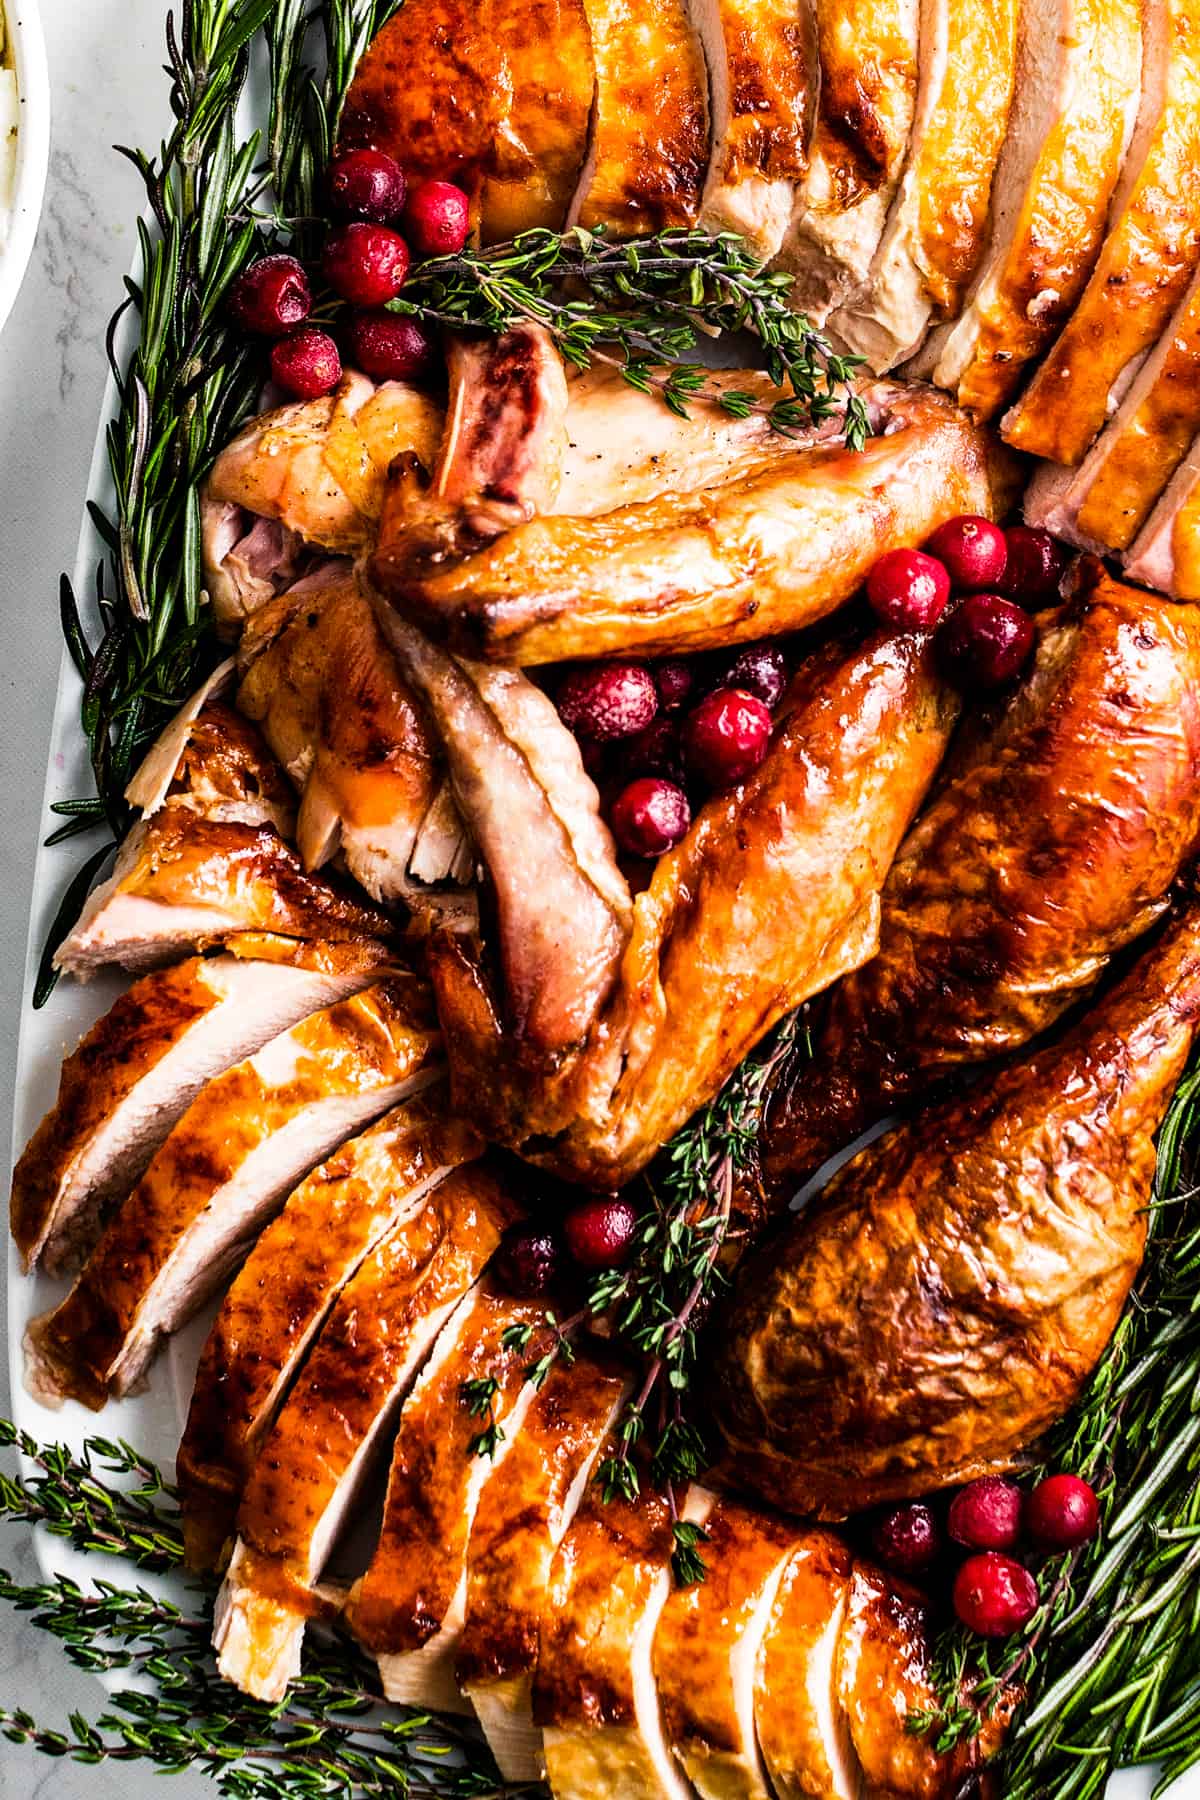 Sliced oven roasted turkey on a serving platter, surrounded with herbs and cranberries.